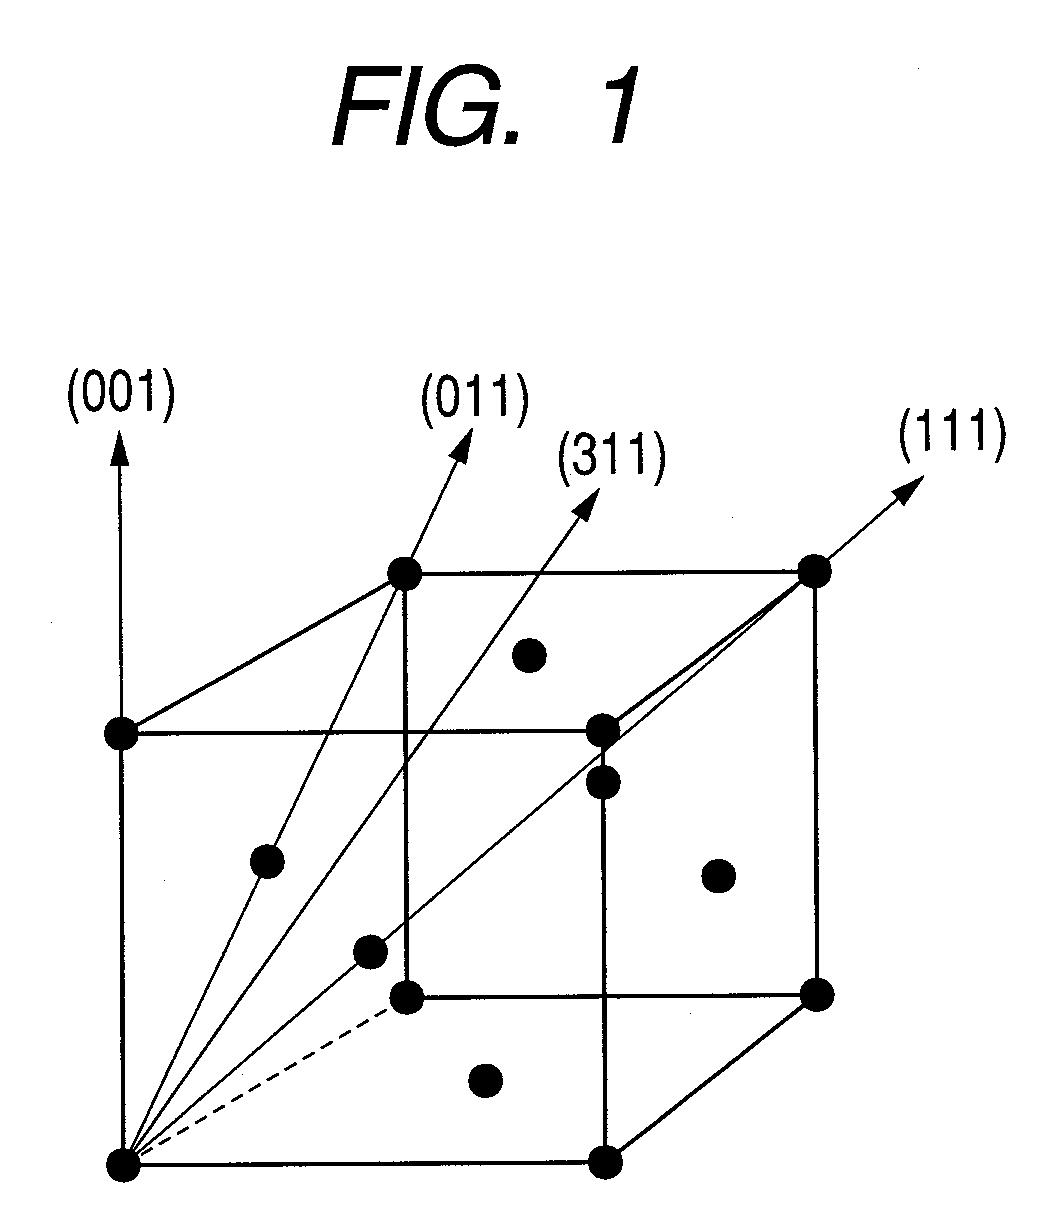 Ai-based alloy sputtering target and process for producing the same